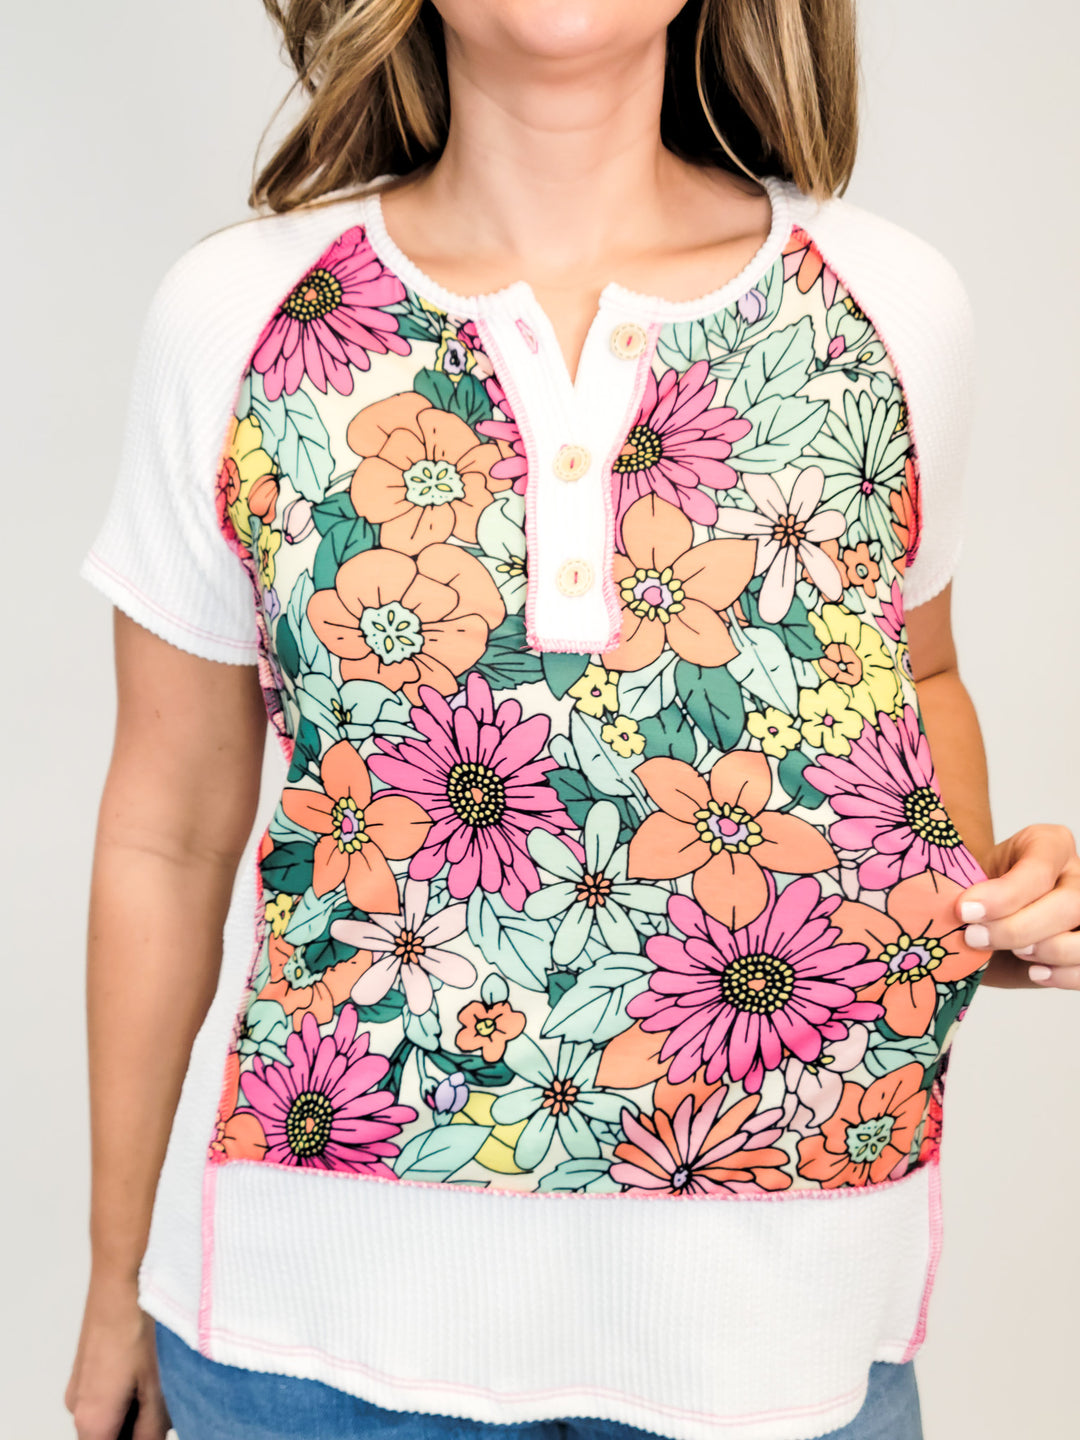 SHORT SLEEVE FLORAL TOP W/BUTTON DETAIL - IVORY/PINK